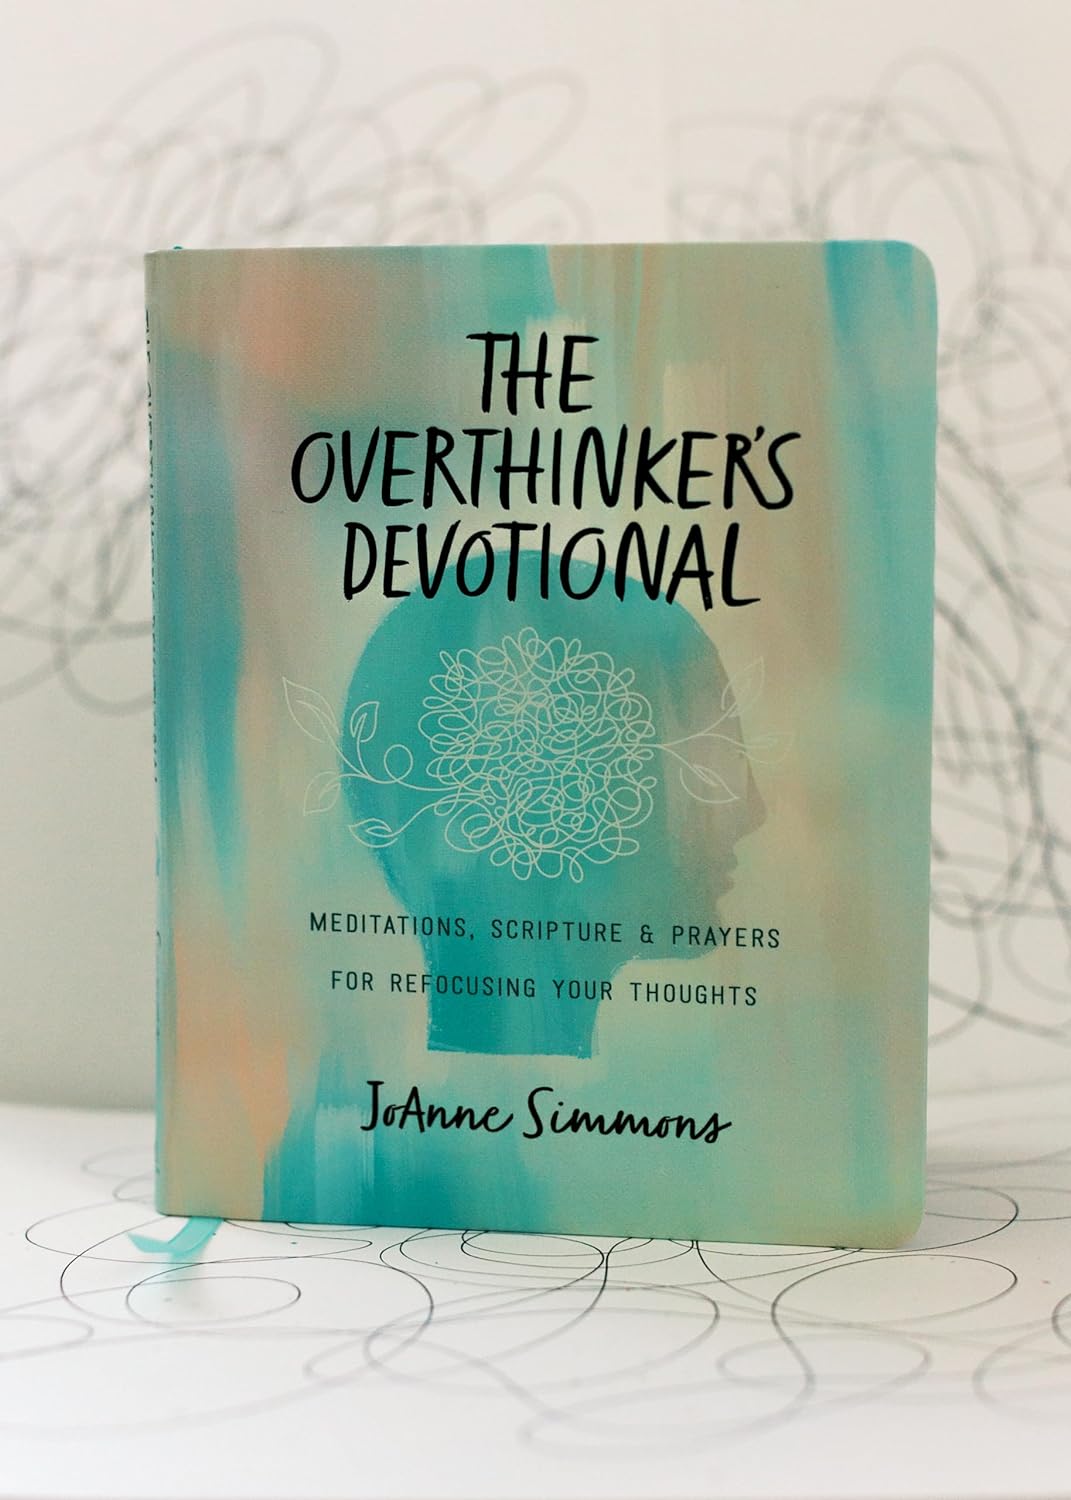 The Overthinker's Devotional: Meditations, Scripture, and Prayers for Refocusing Your Thoughts